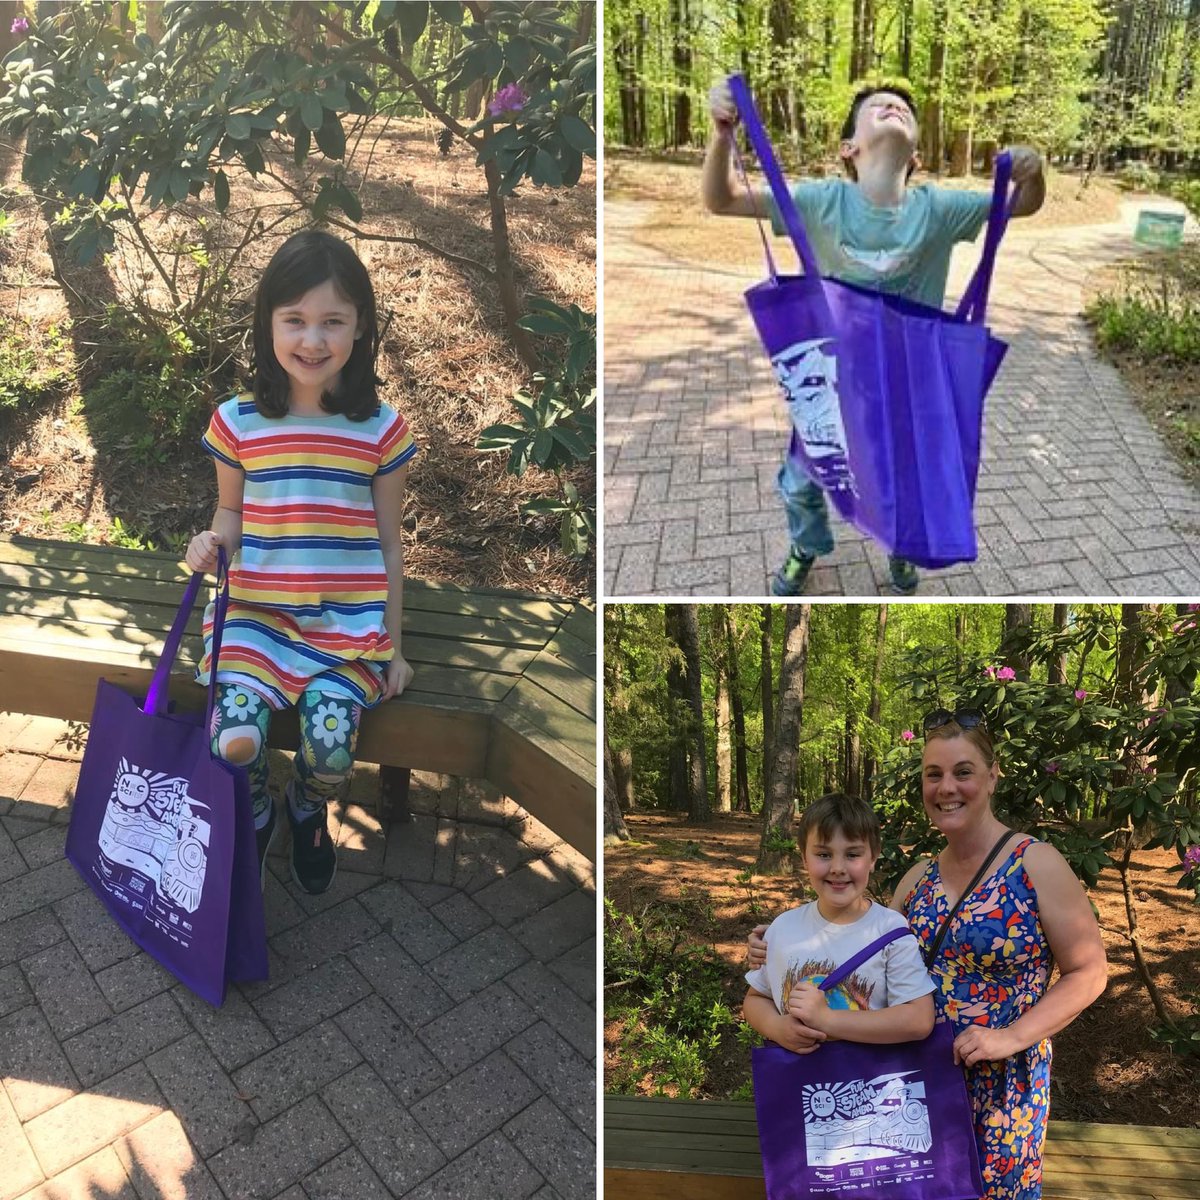 Congratulations to the winners of the Great Blue Jay Nature Hunt! These stars won an array of NC Science Festival gear and had a great time. Thank you to everyone who participated this year at #BlueJayPoint.

#NCSciFest2023 #ncscifest #GoKelvinGo